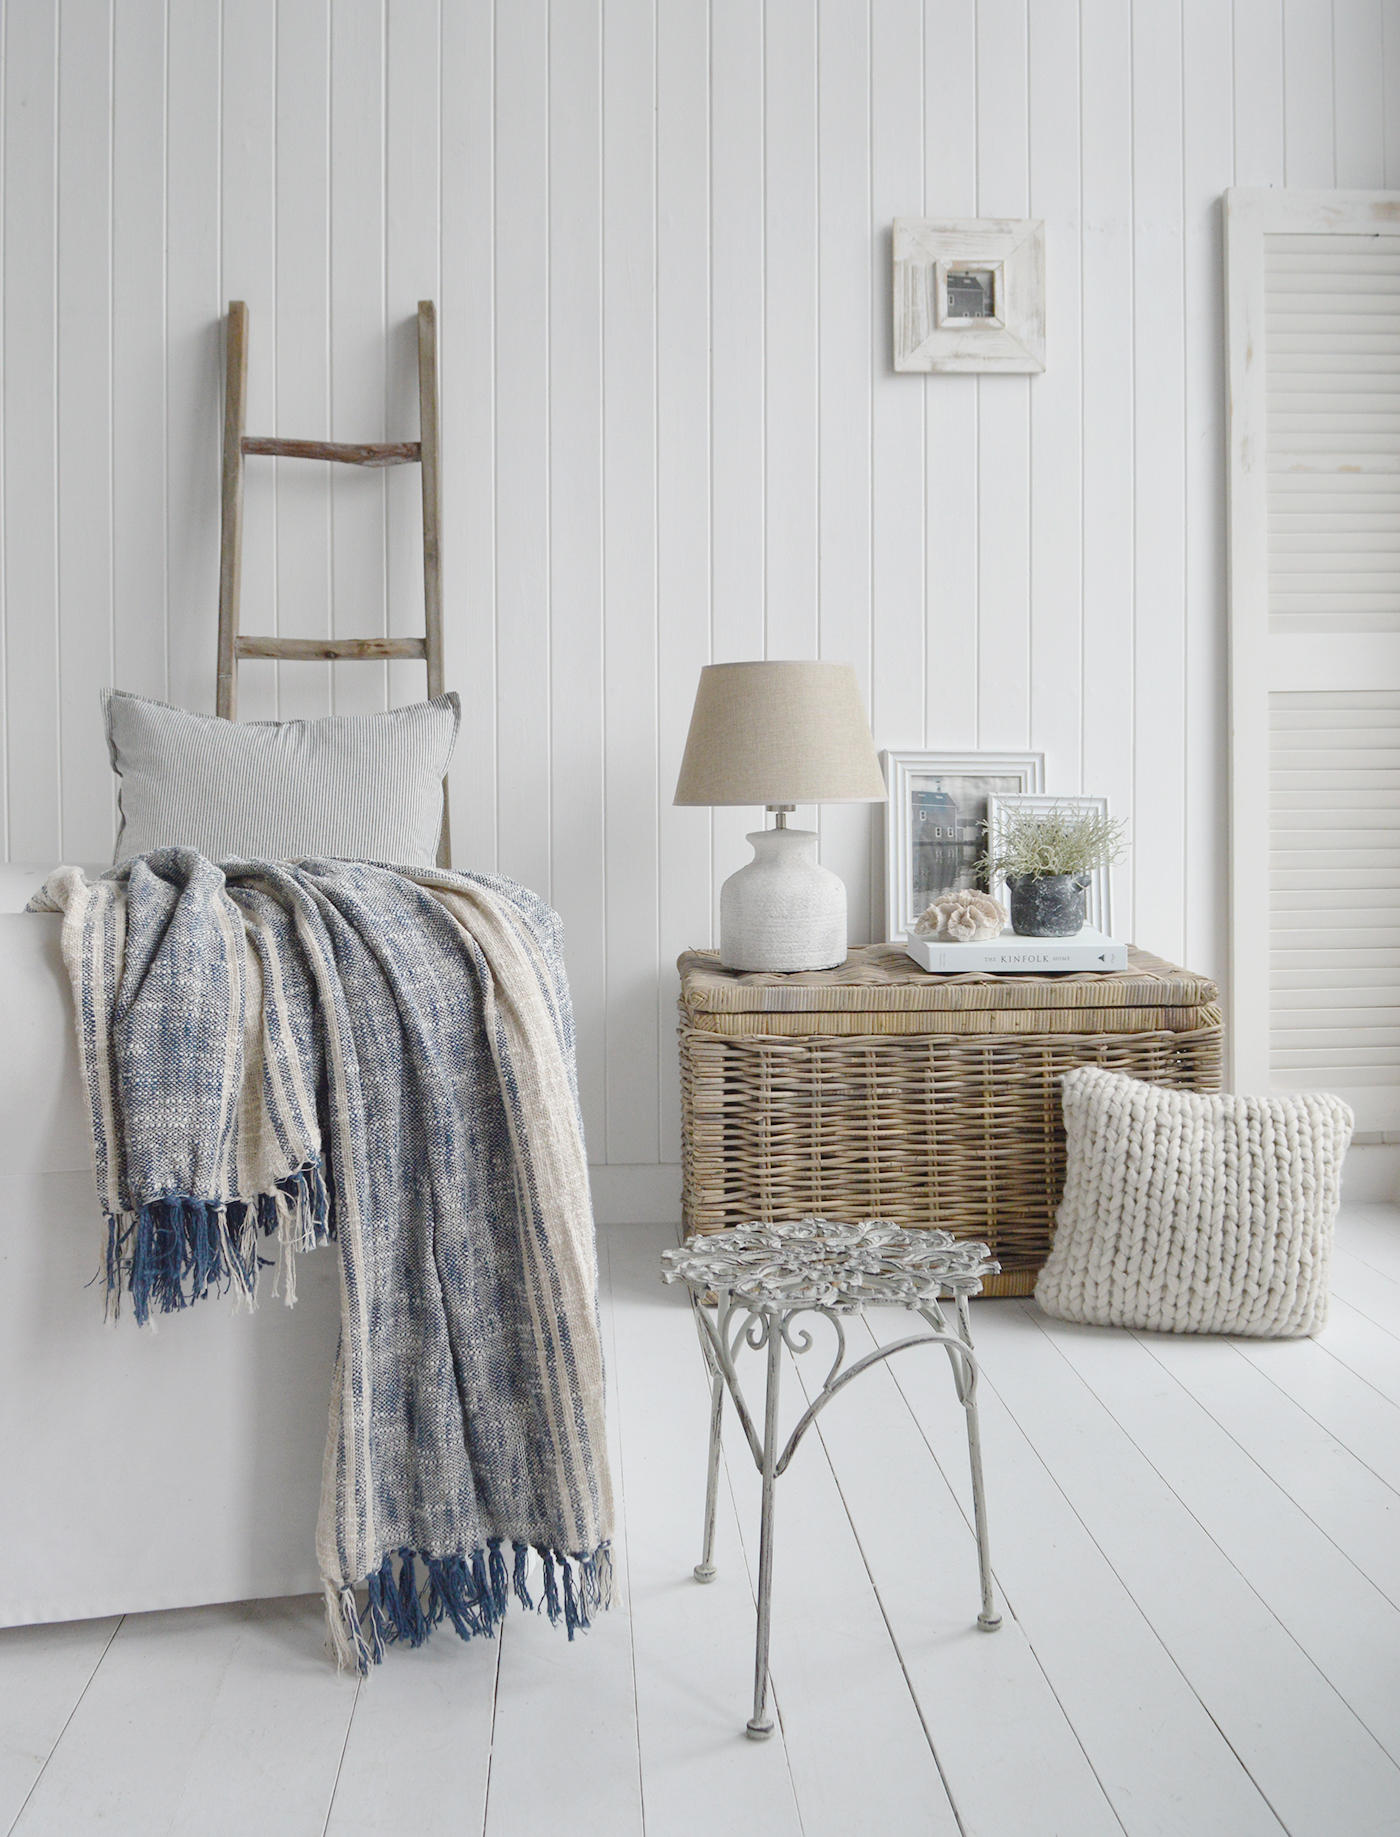 The Seaside willow table with storage shown in a New England style coastal living room. Shown alongside the Hudson blue and linen throw and Harvard table